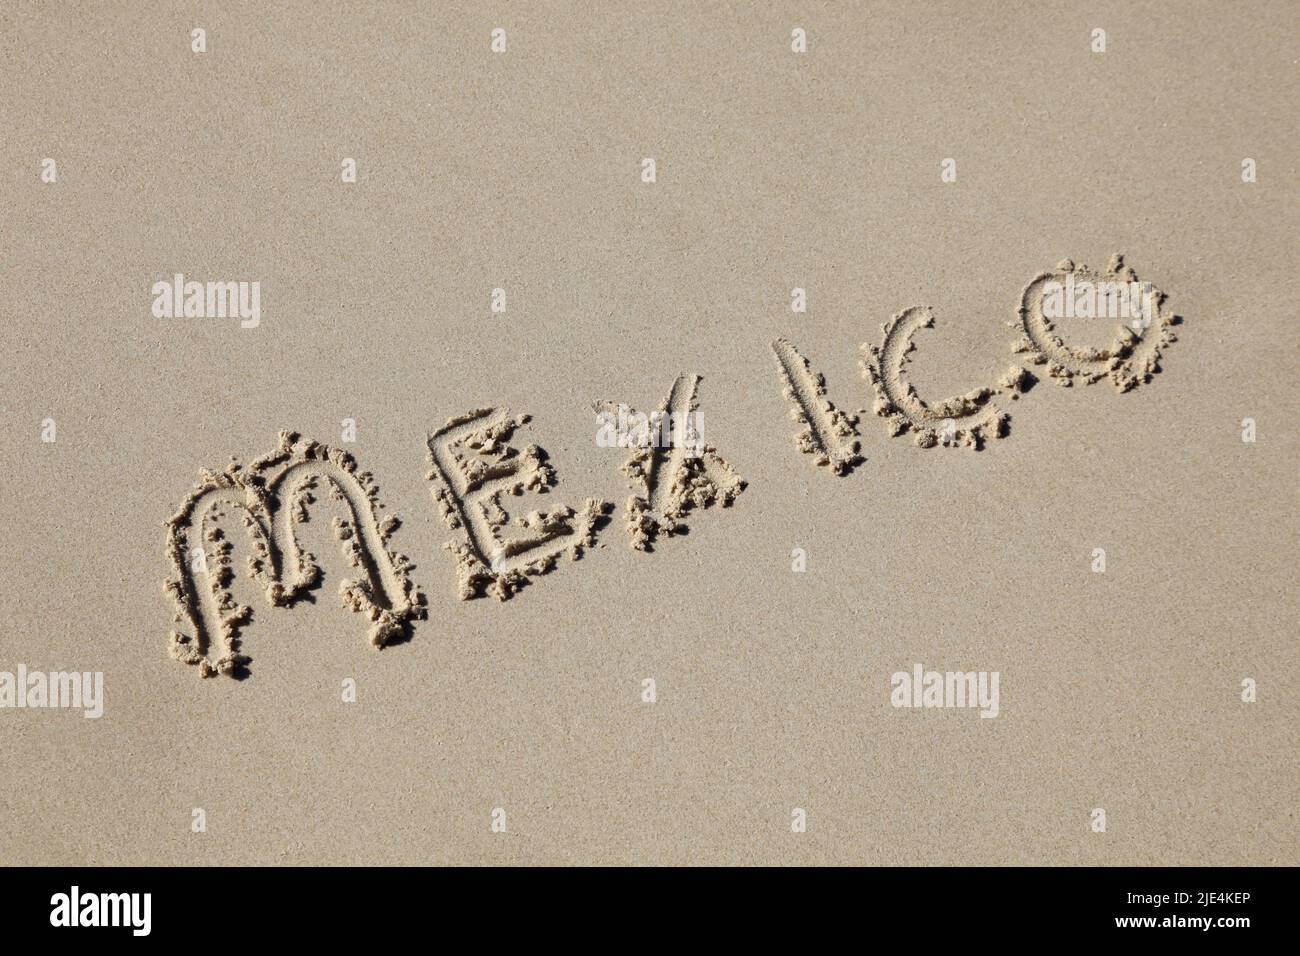 mexico written in the sand at the beach. Mexico's beaches are one of its tourist destinations. Stock Photo